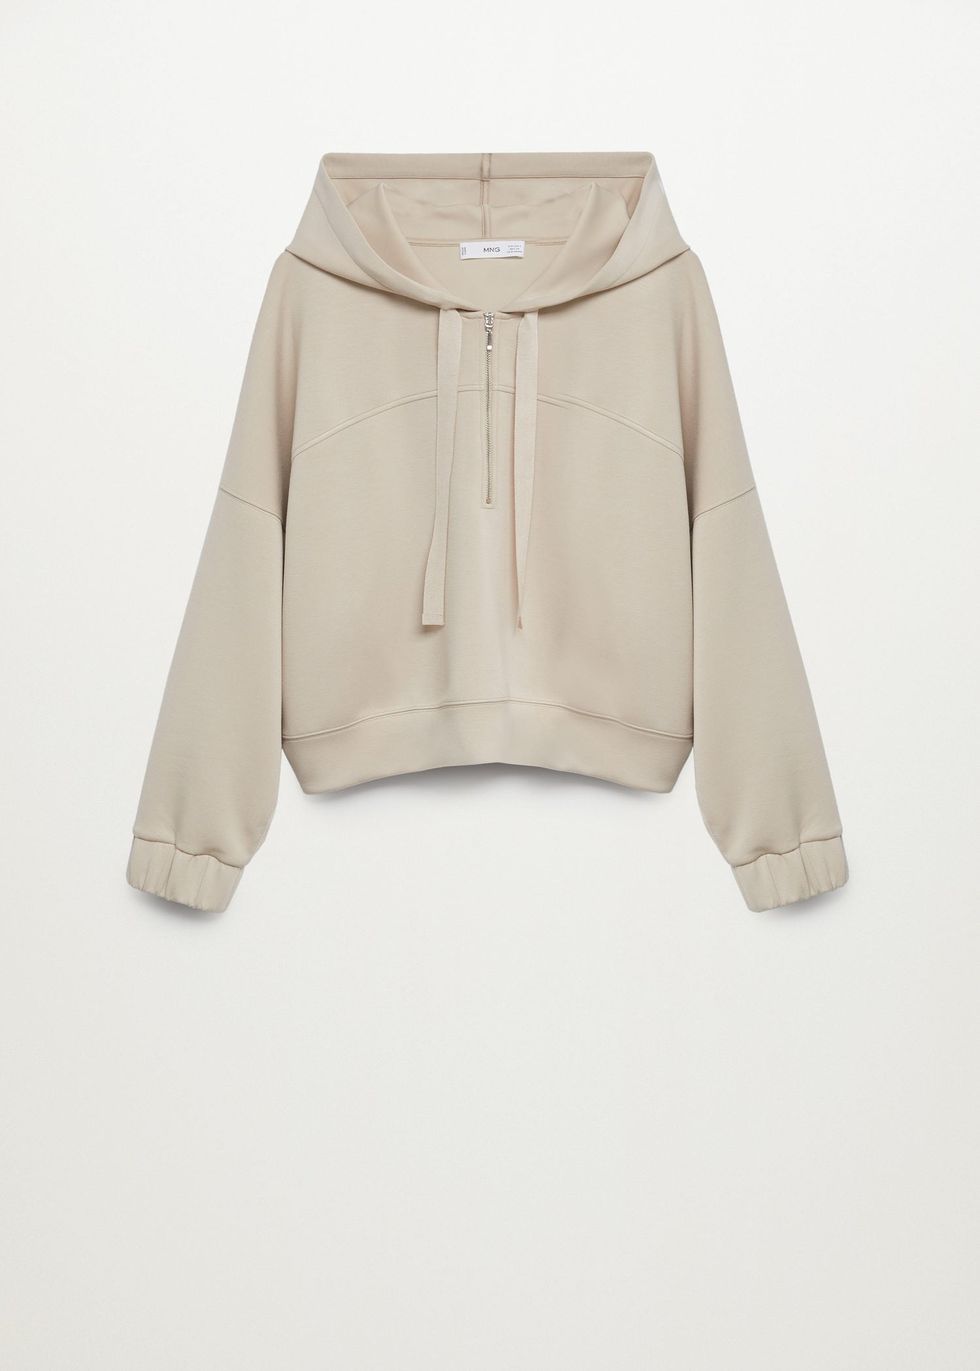 Hoodies for women: 14 best luxe hoodies for high-low styling